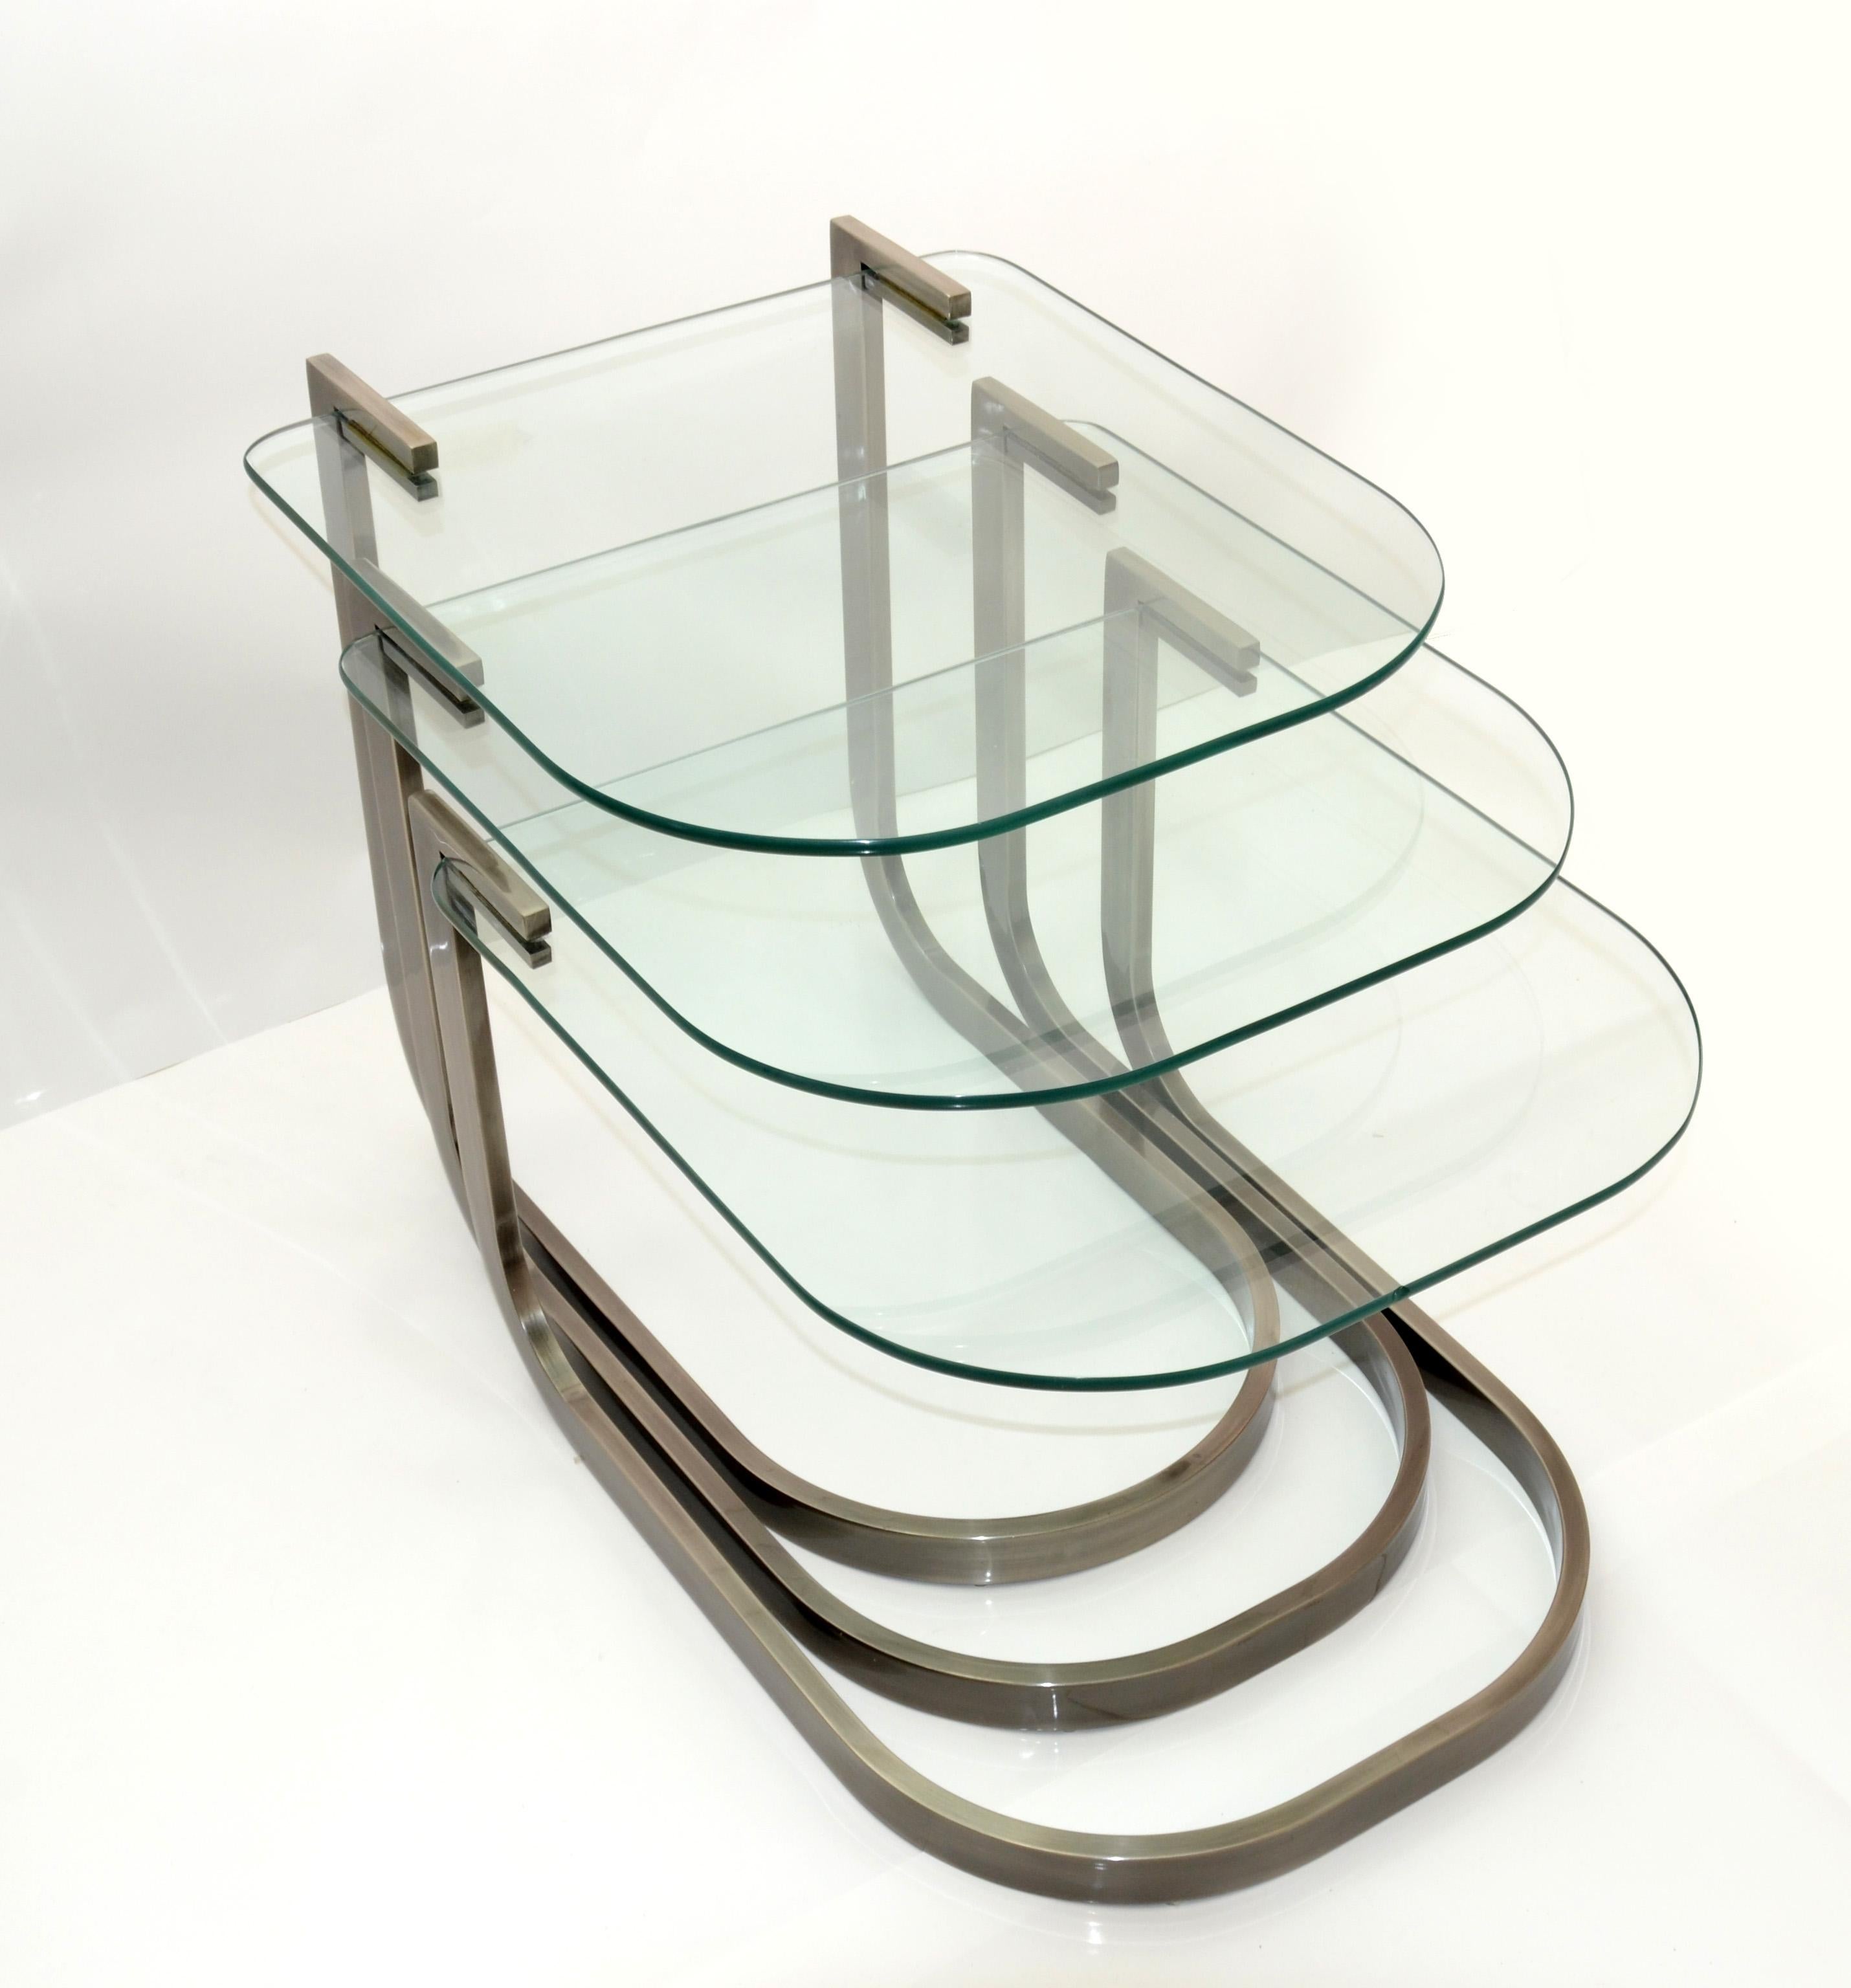 20th Century Design Institute of America 'DIA' Three Vintage Glass & Steel Nesting Tables For Sale